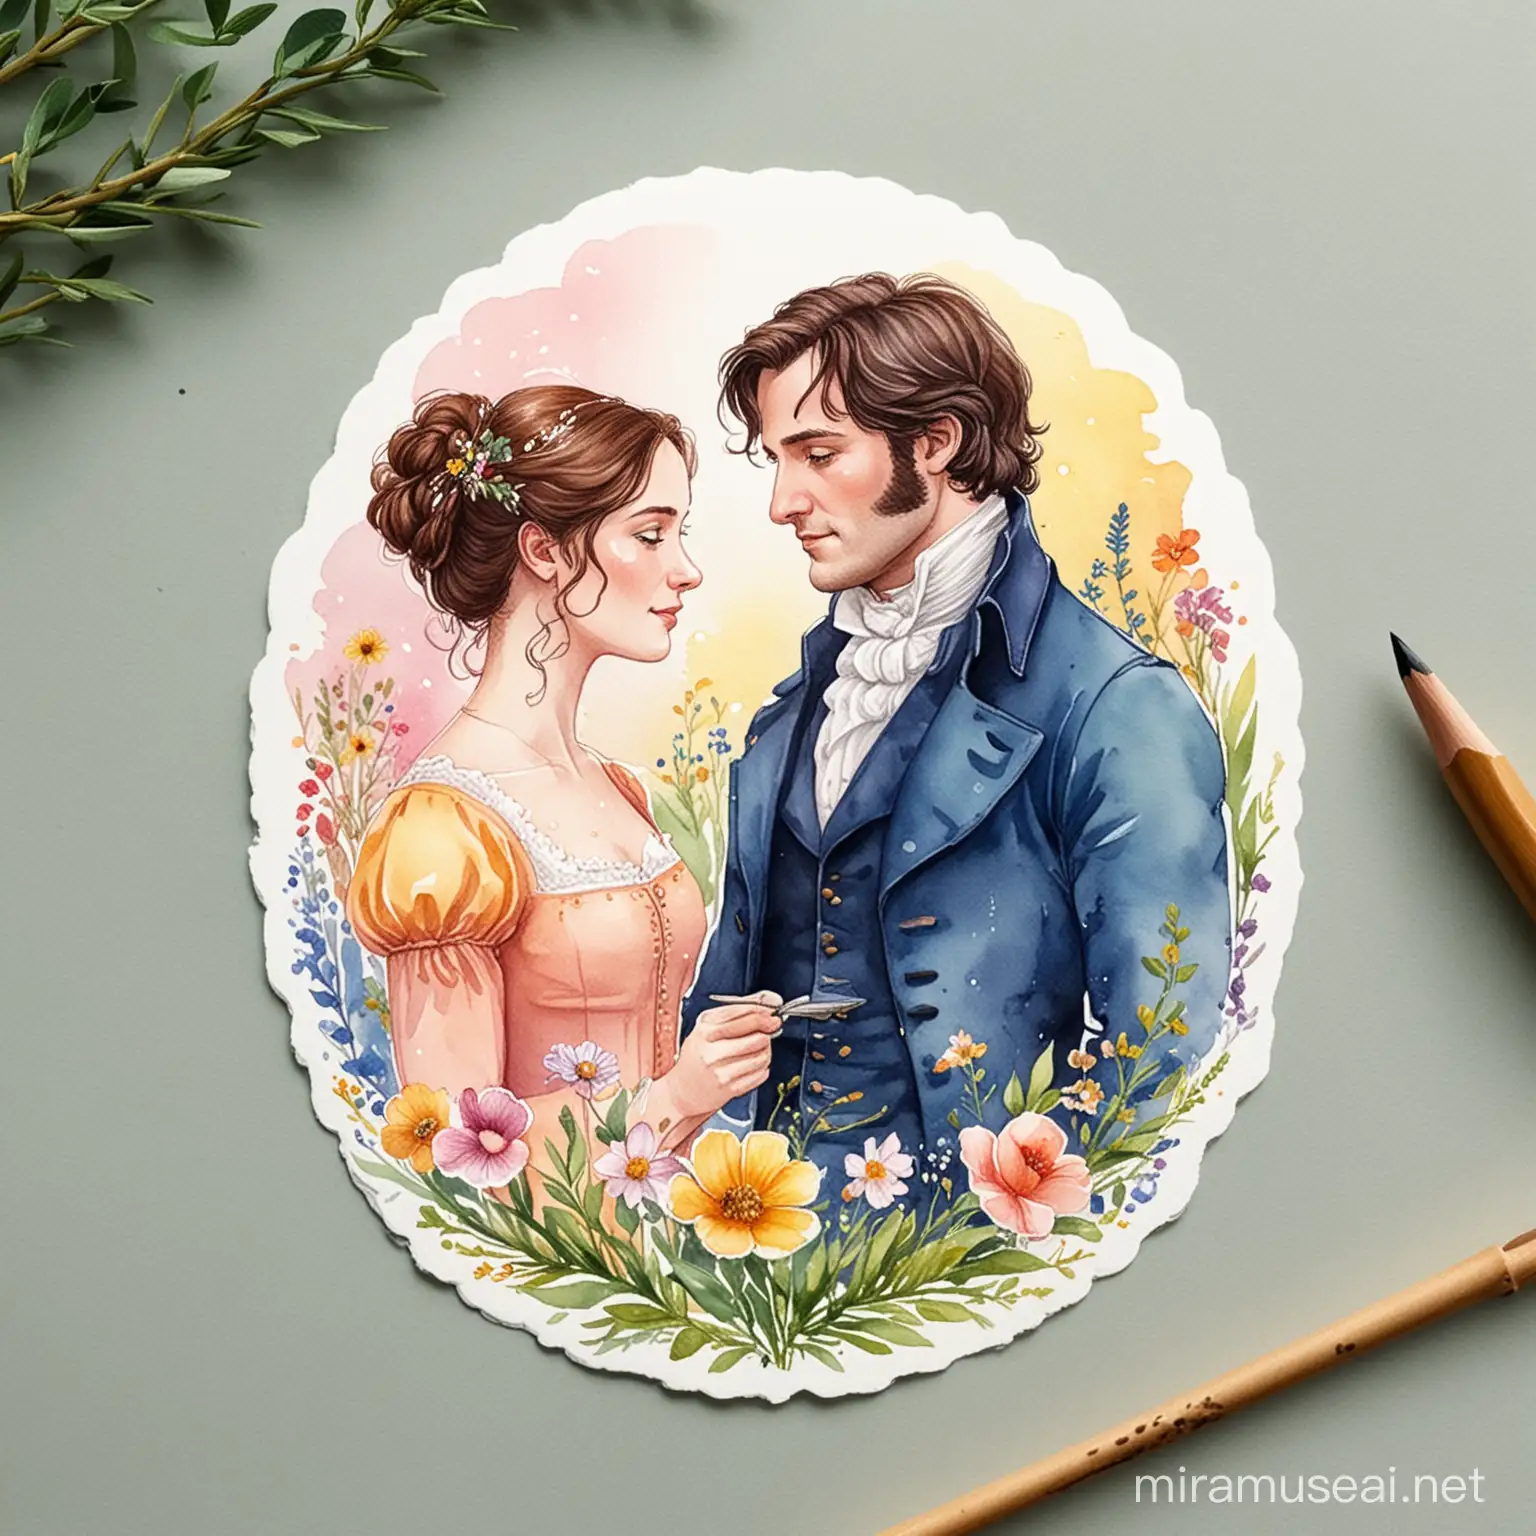 Elizabeth Bennet and Mr Darcy Watercolor Illustration with Floral Surroundings